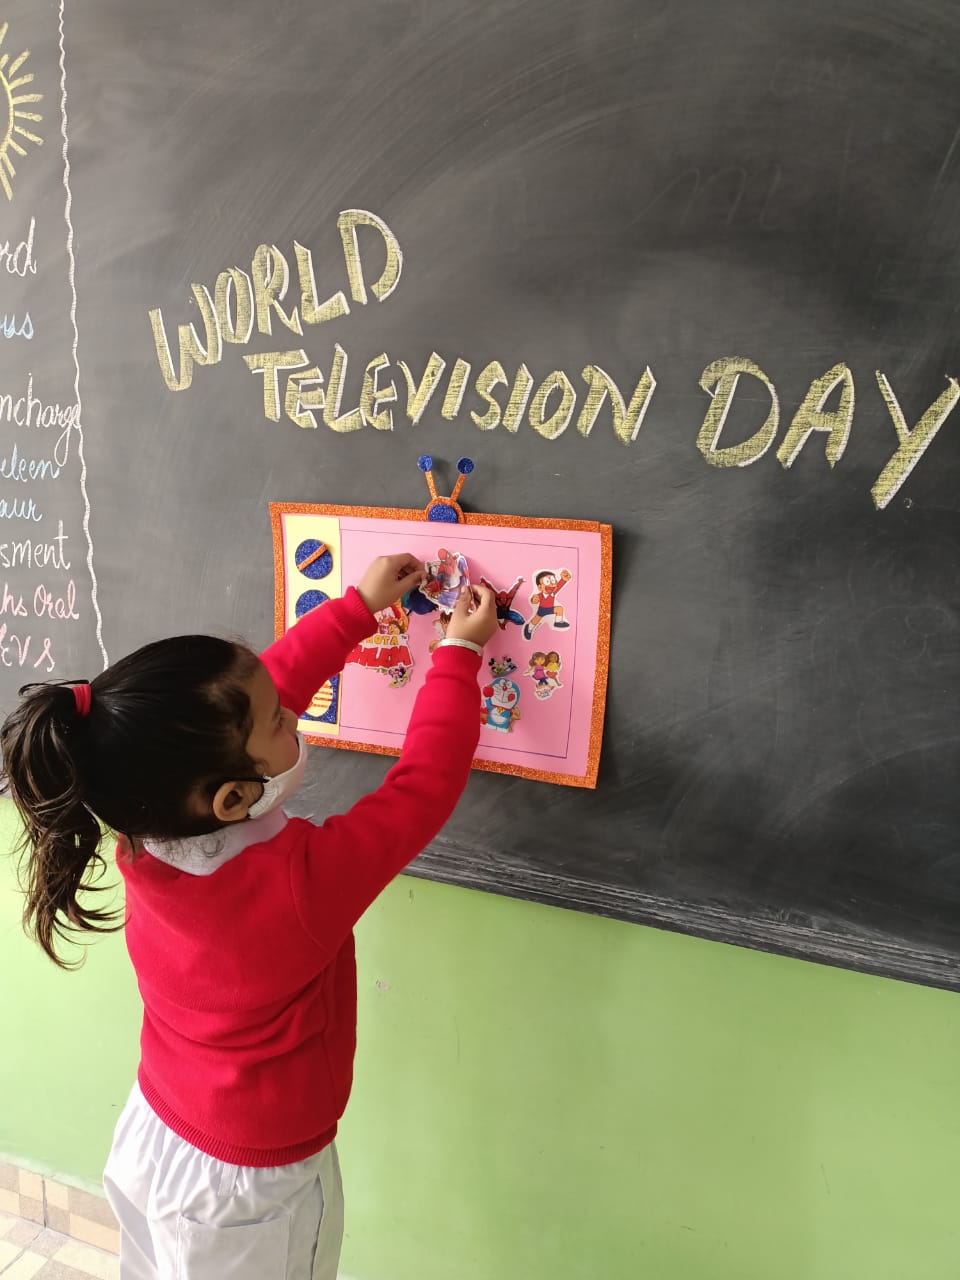 WORLD TELEVISION DAY